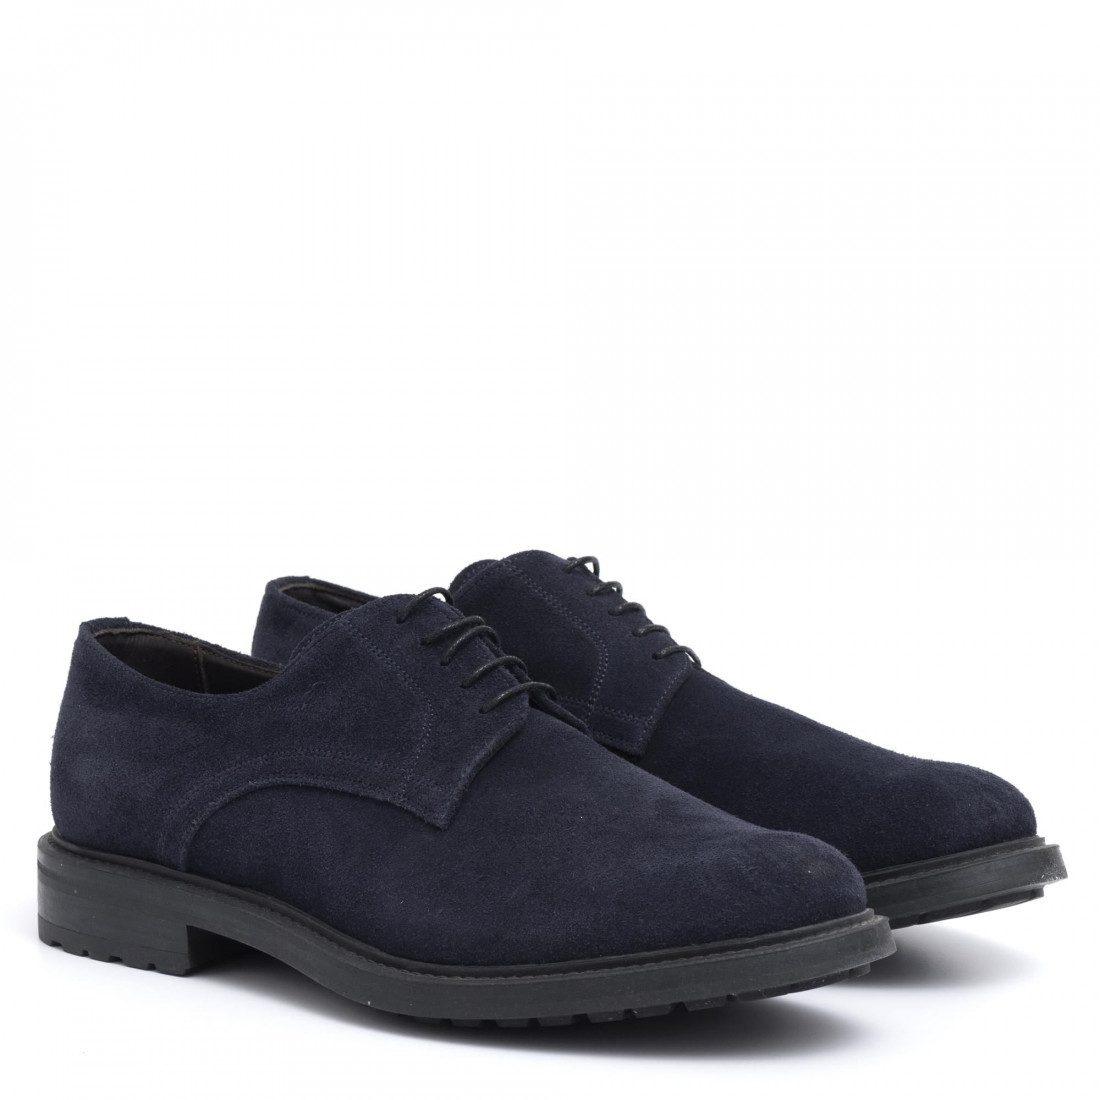 Derby shoes in blue suede